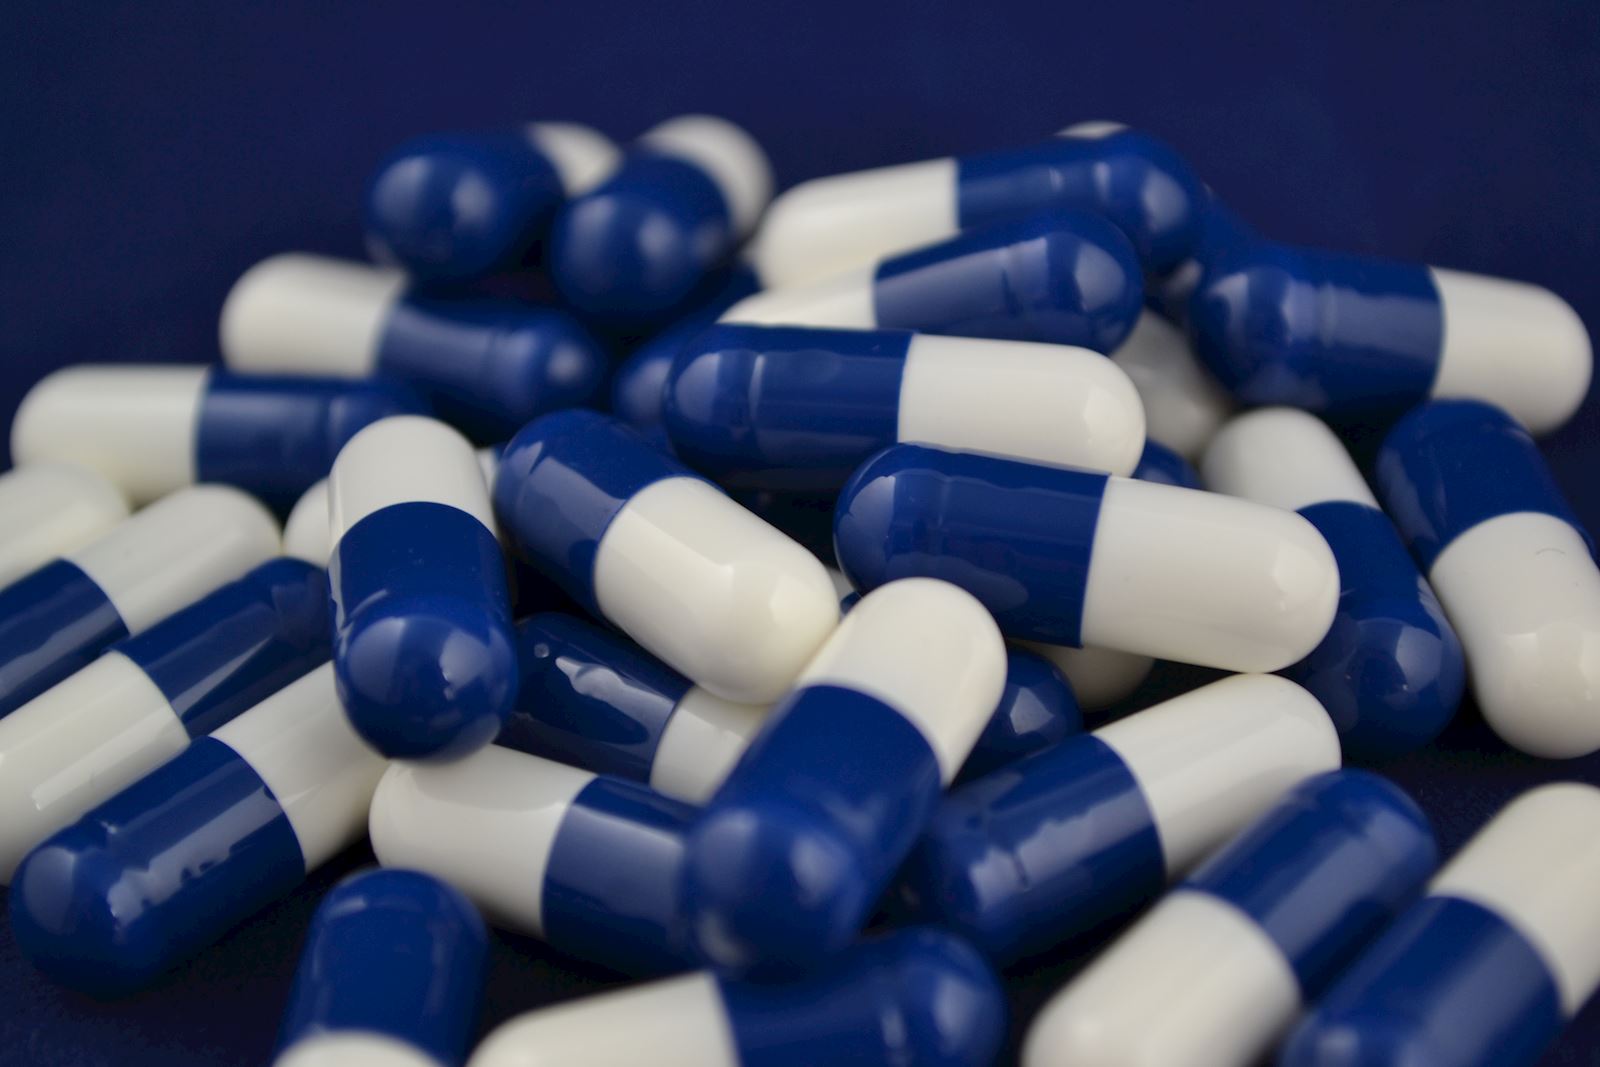 Blue and white pharmaceutical capsules